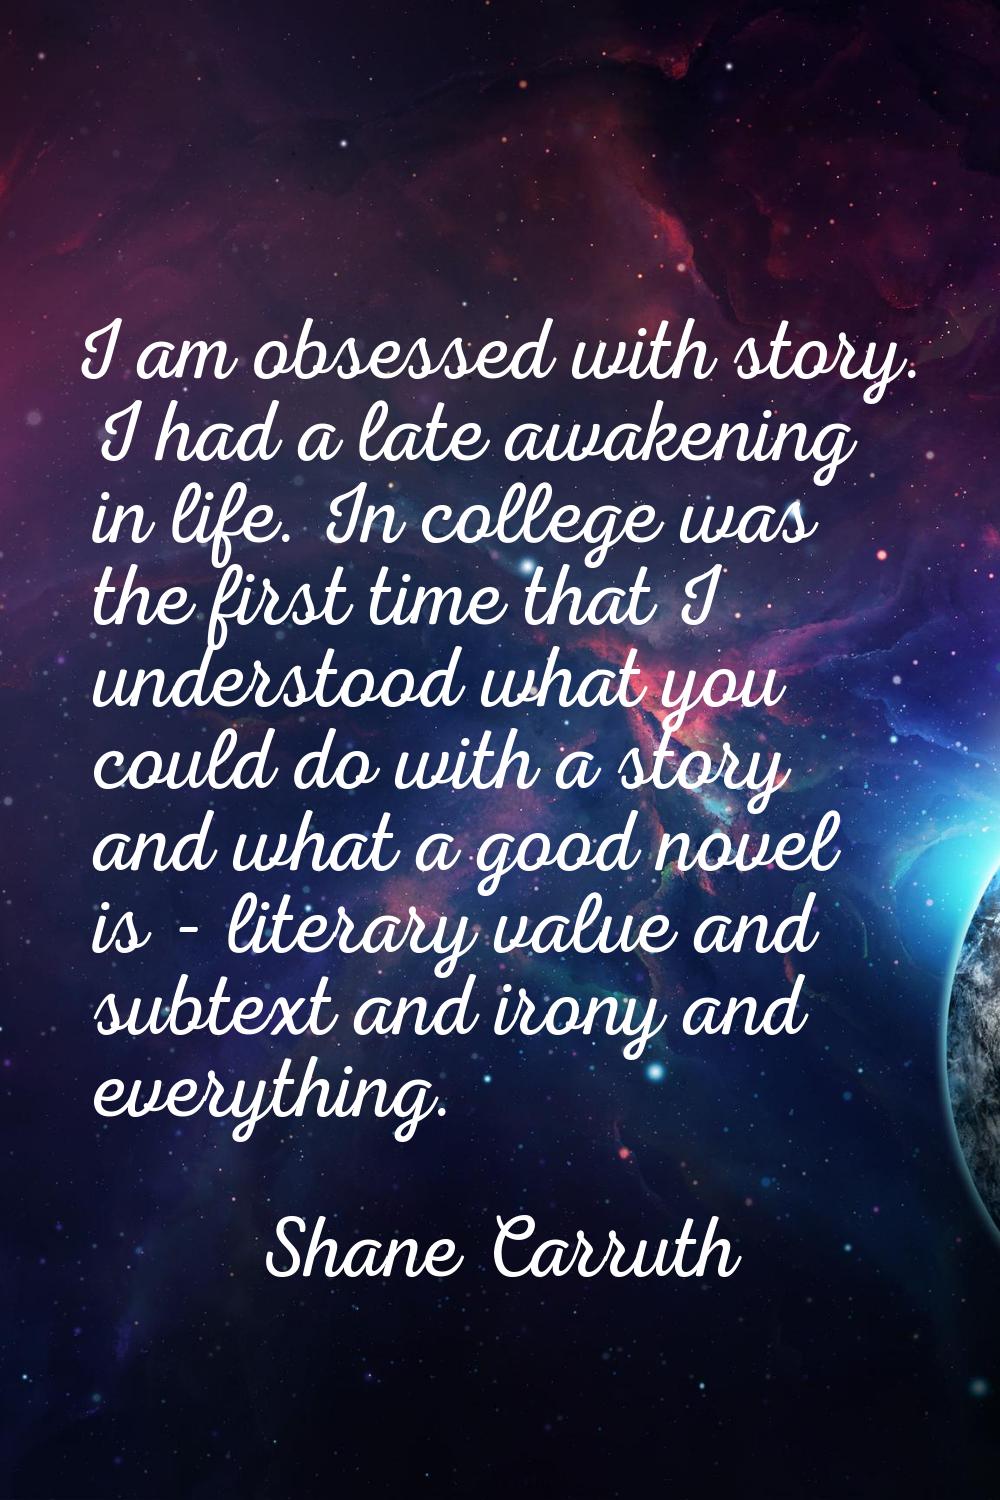 I am obsessed with story. I had a late awakening in life. In college was the first time that I unde